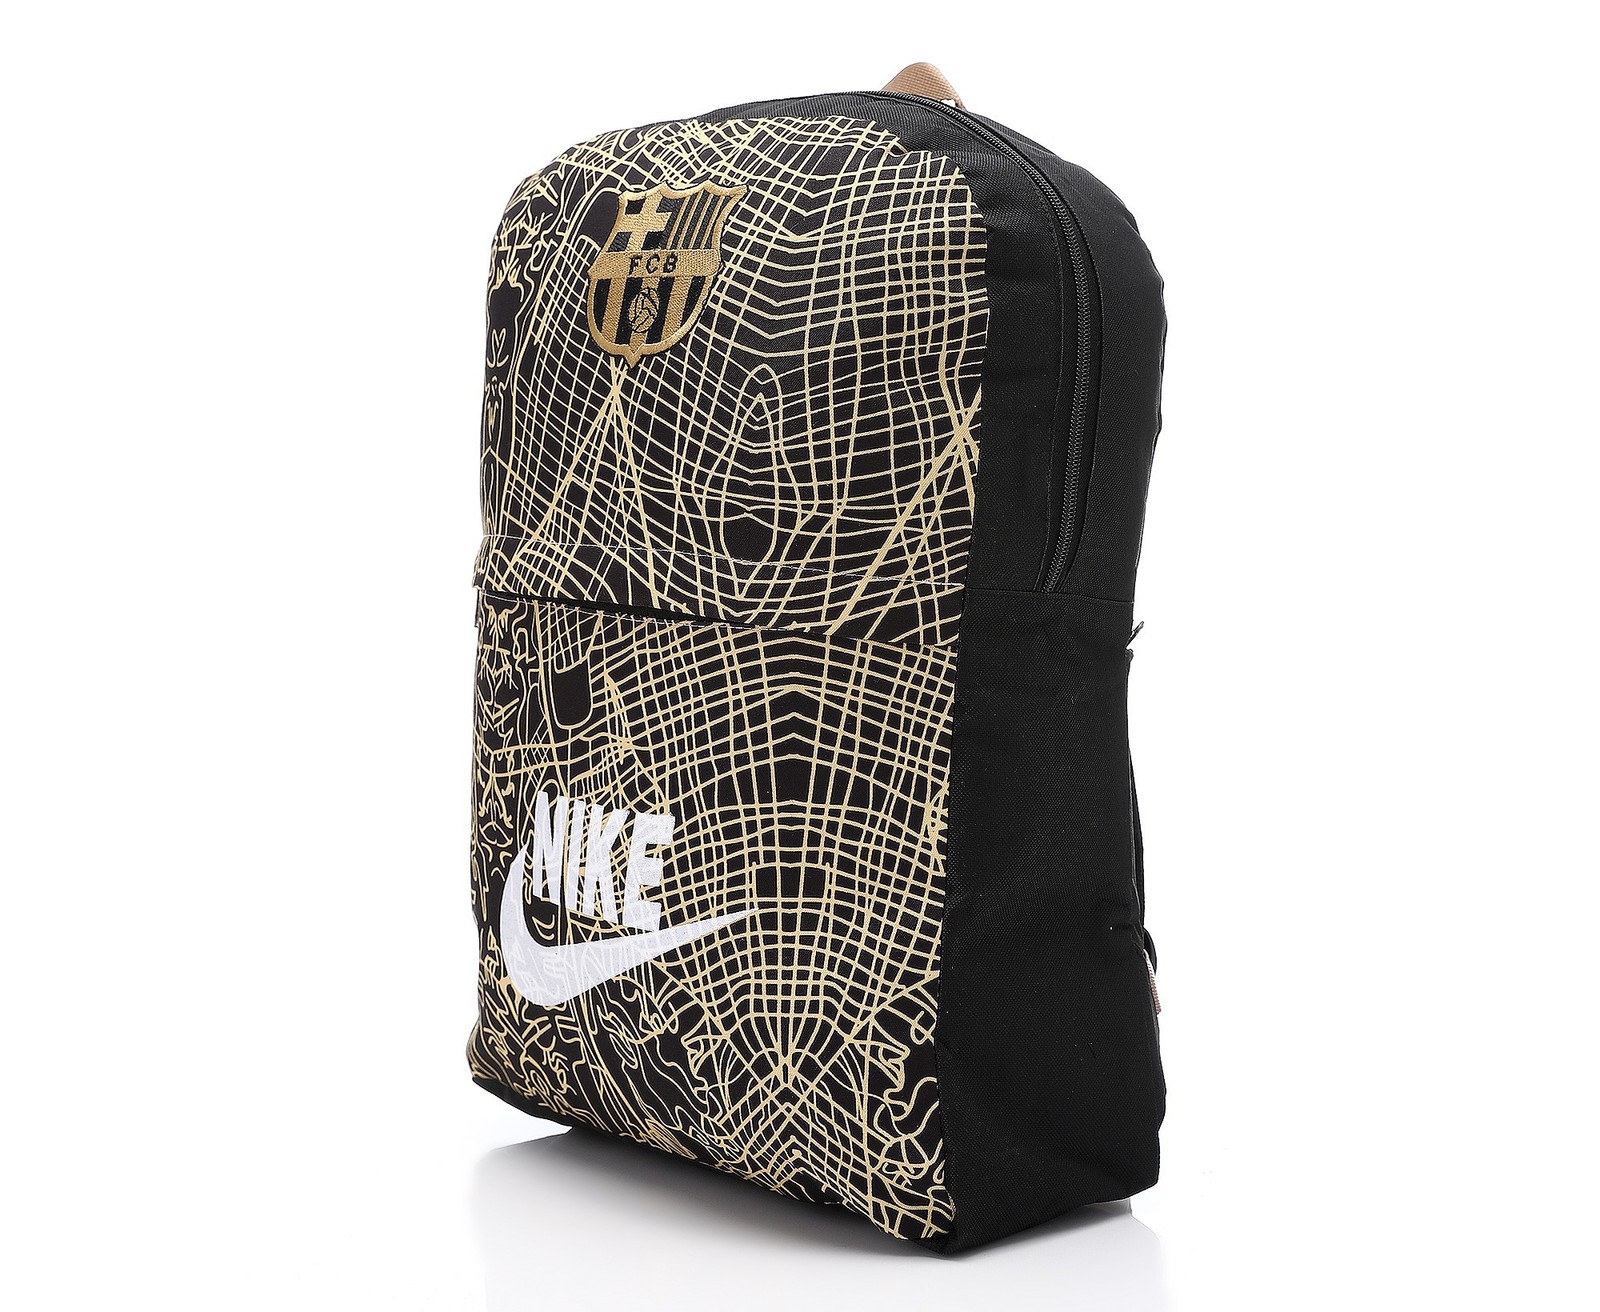 Barcelona Backpack // SPECIAL OFFER // FREE SHIPPING  - $48.00